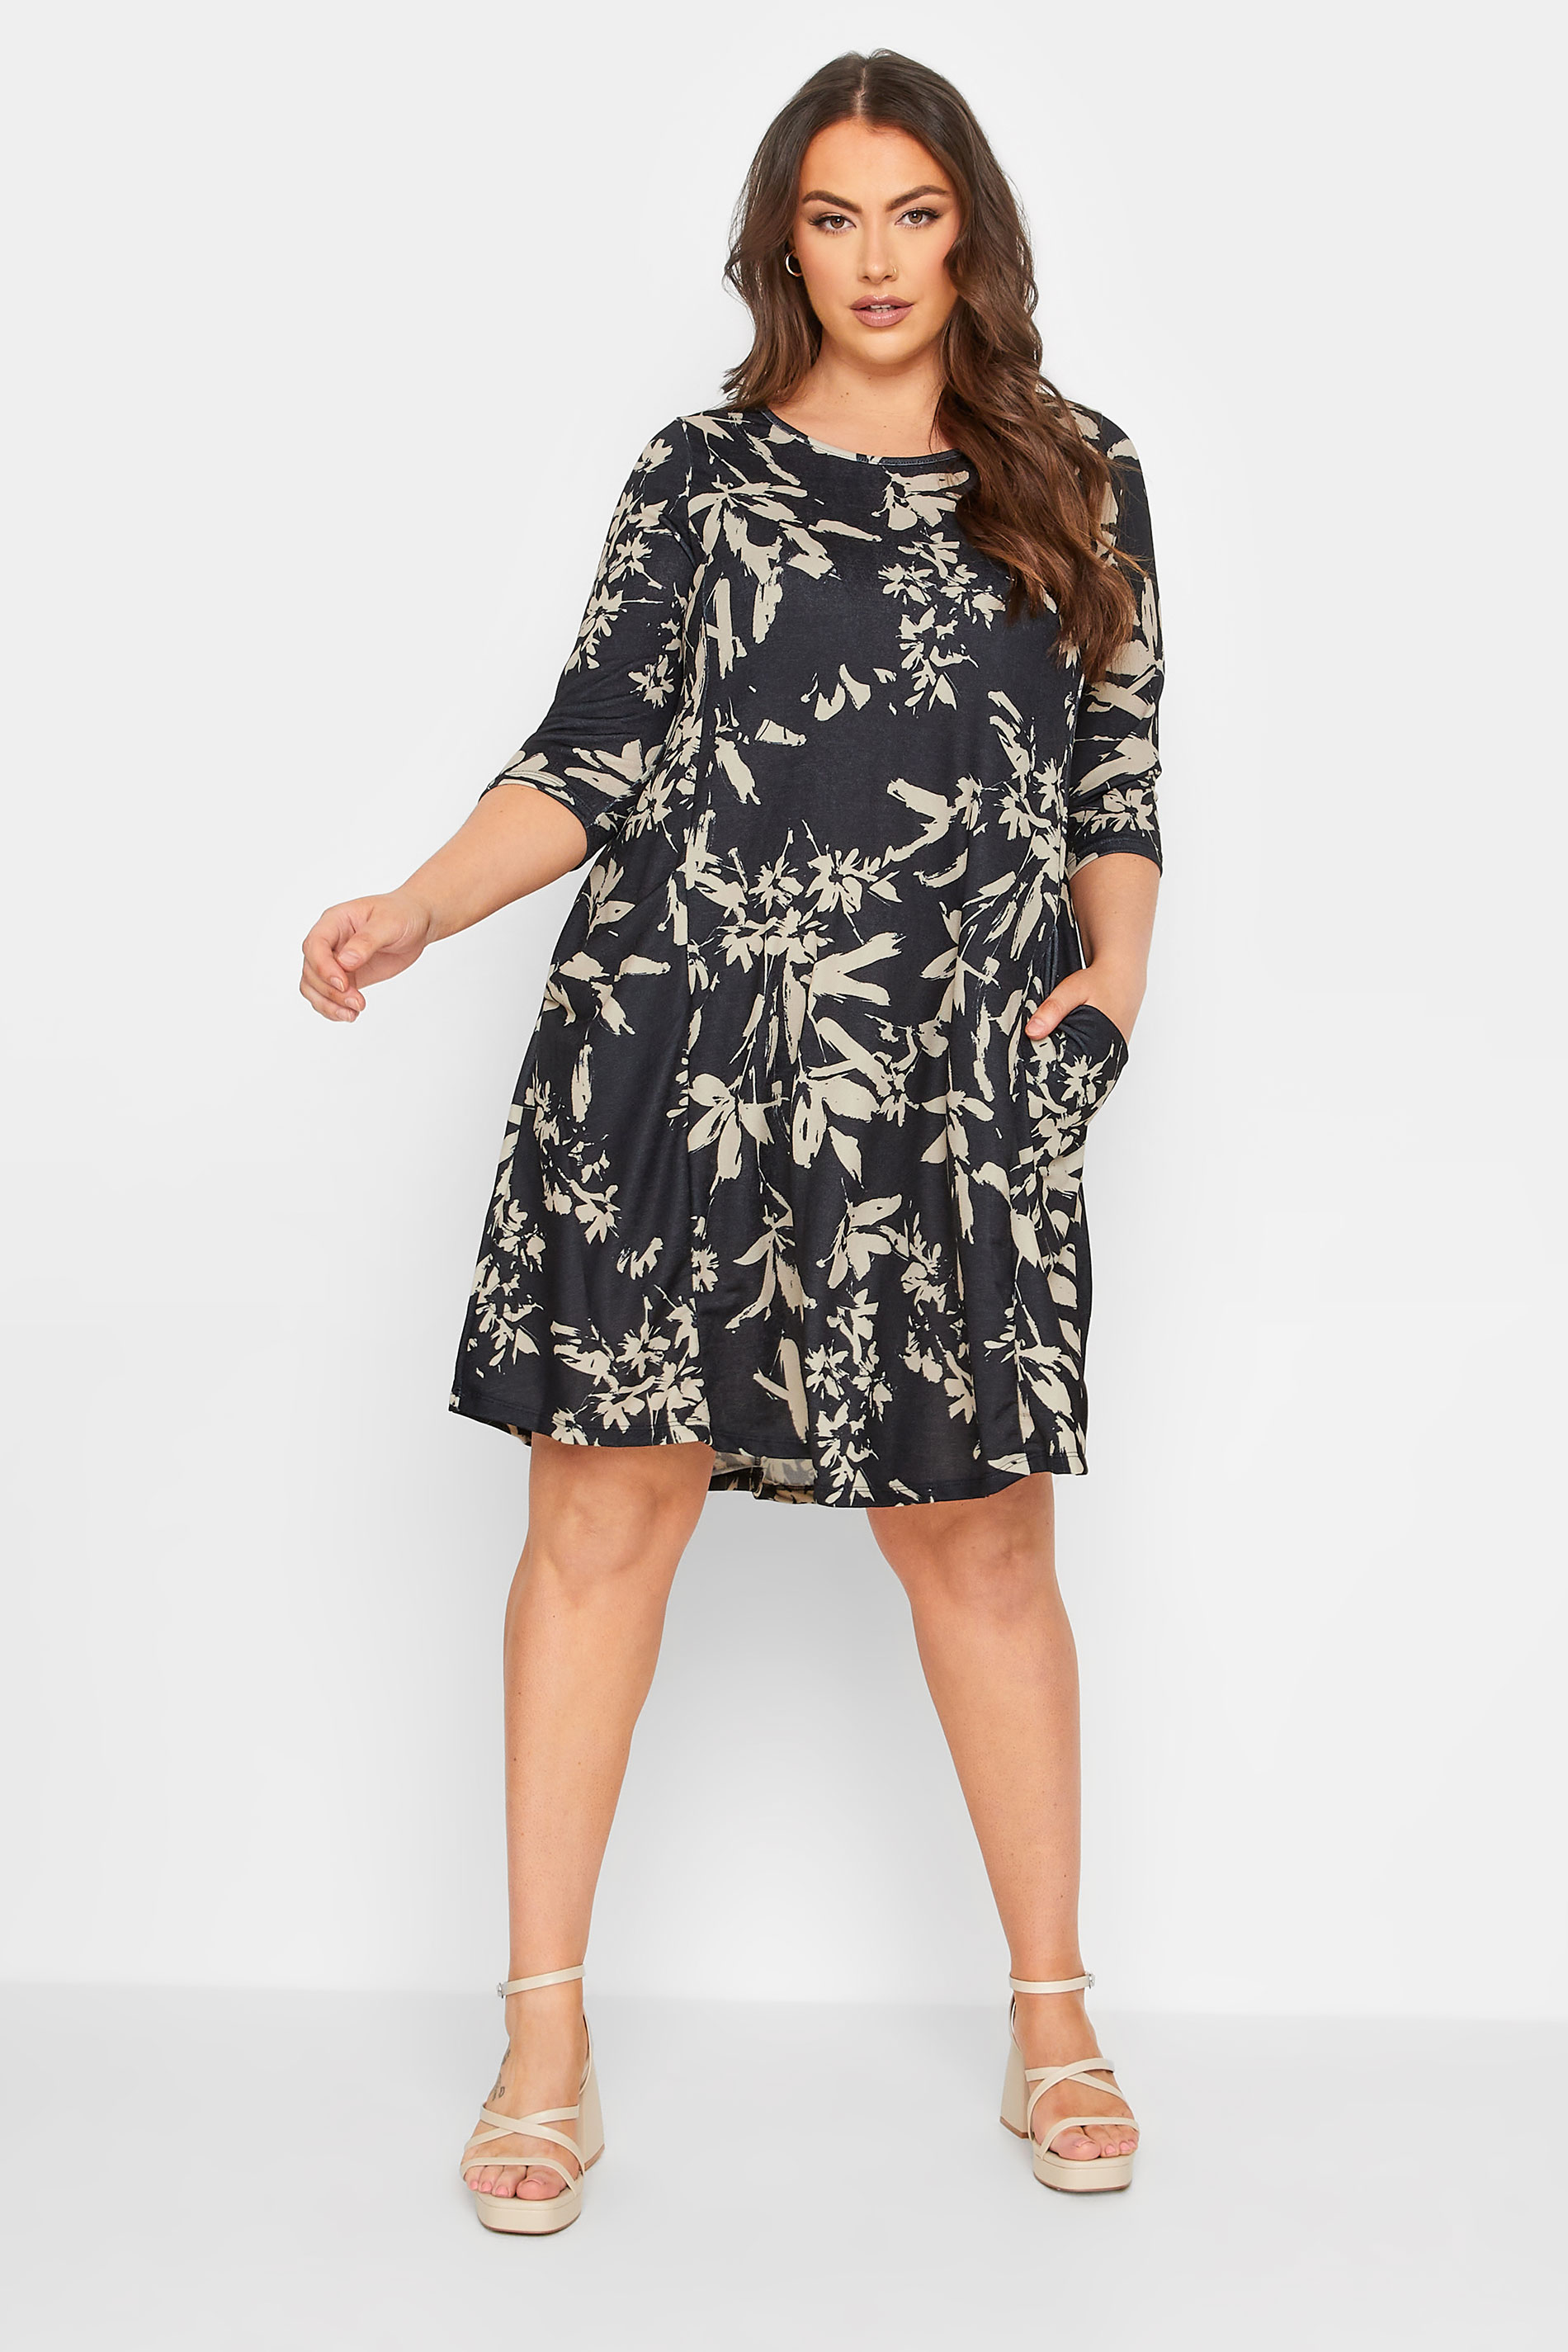 Plus Size Black Floral Print Pocket Swing Dress | Yours Clothing 1